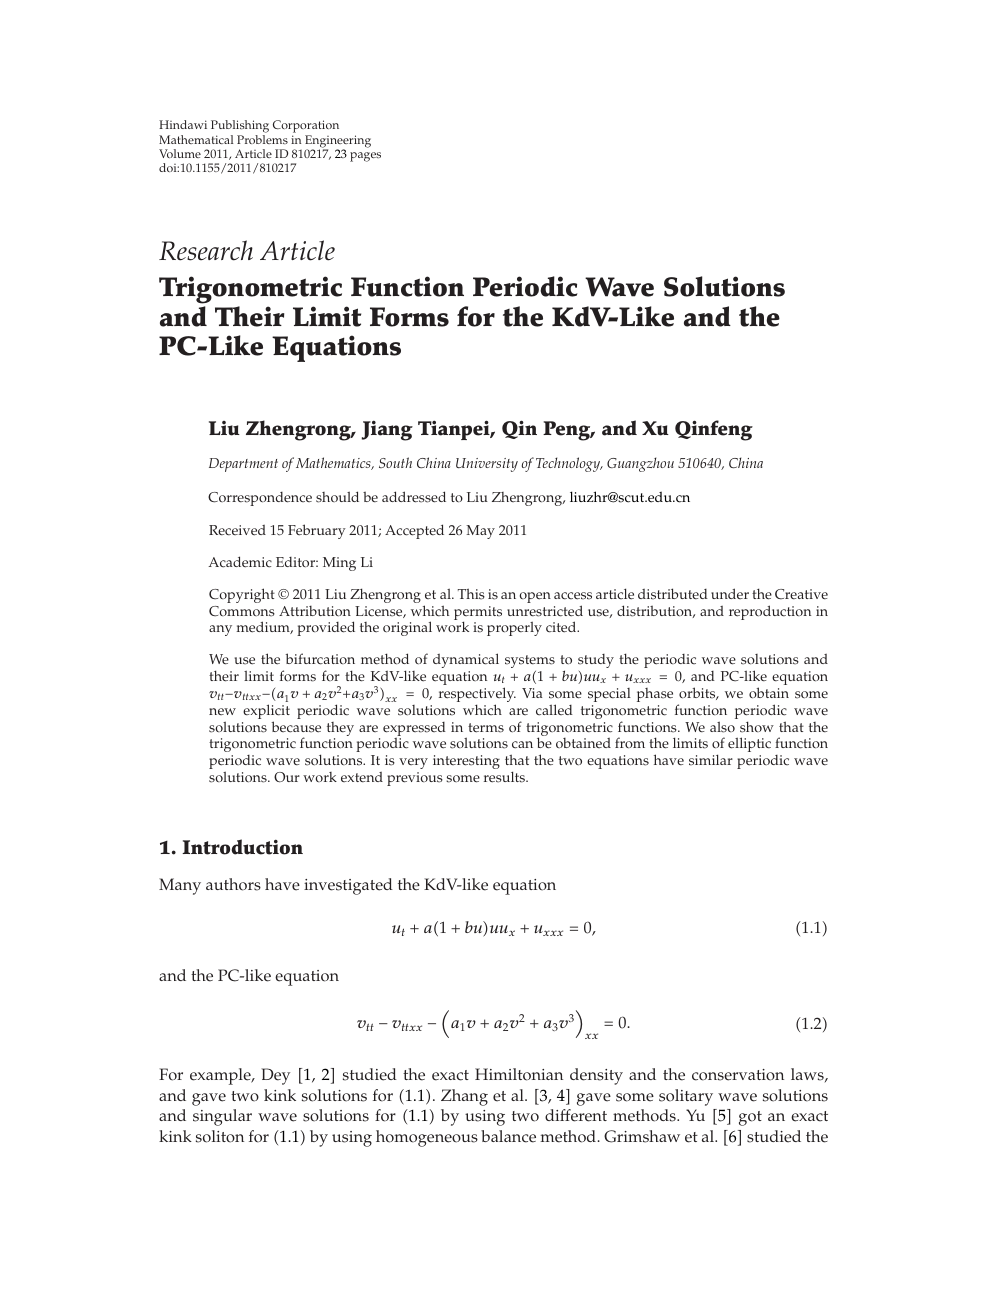 Trigonometric Function Periodic Wave Solutions And Their Limit Forms For The Kdv Like And The Pc Like Equations Topic Of Research Paper In Mathematics Download Scholarly Article Pdf And Read For Free On